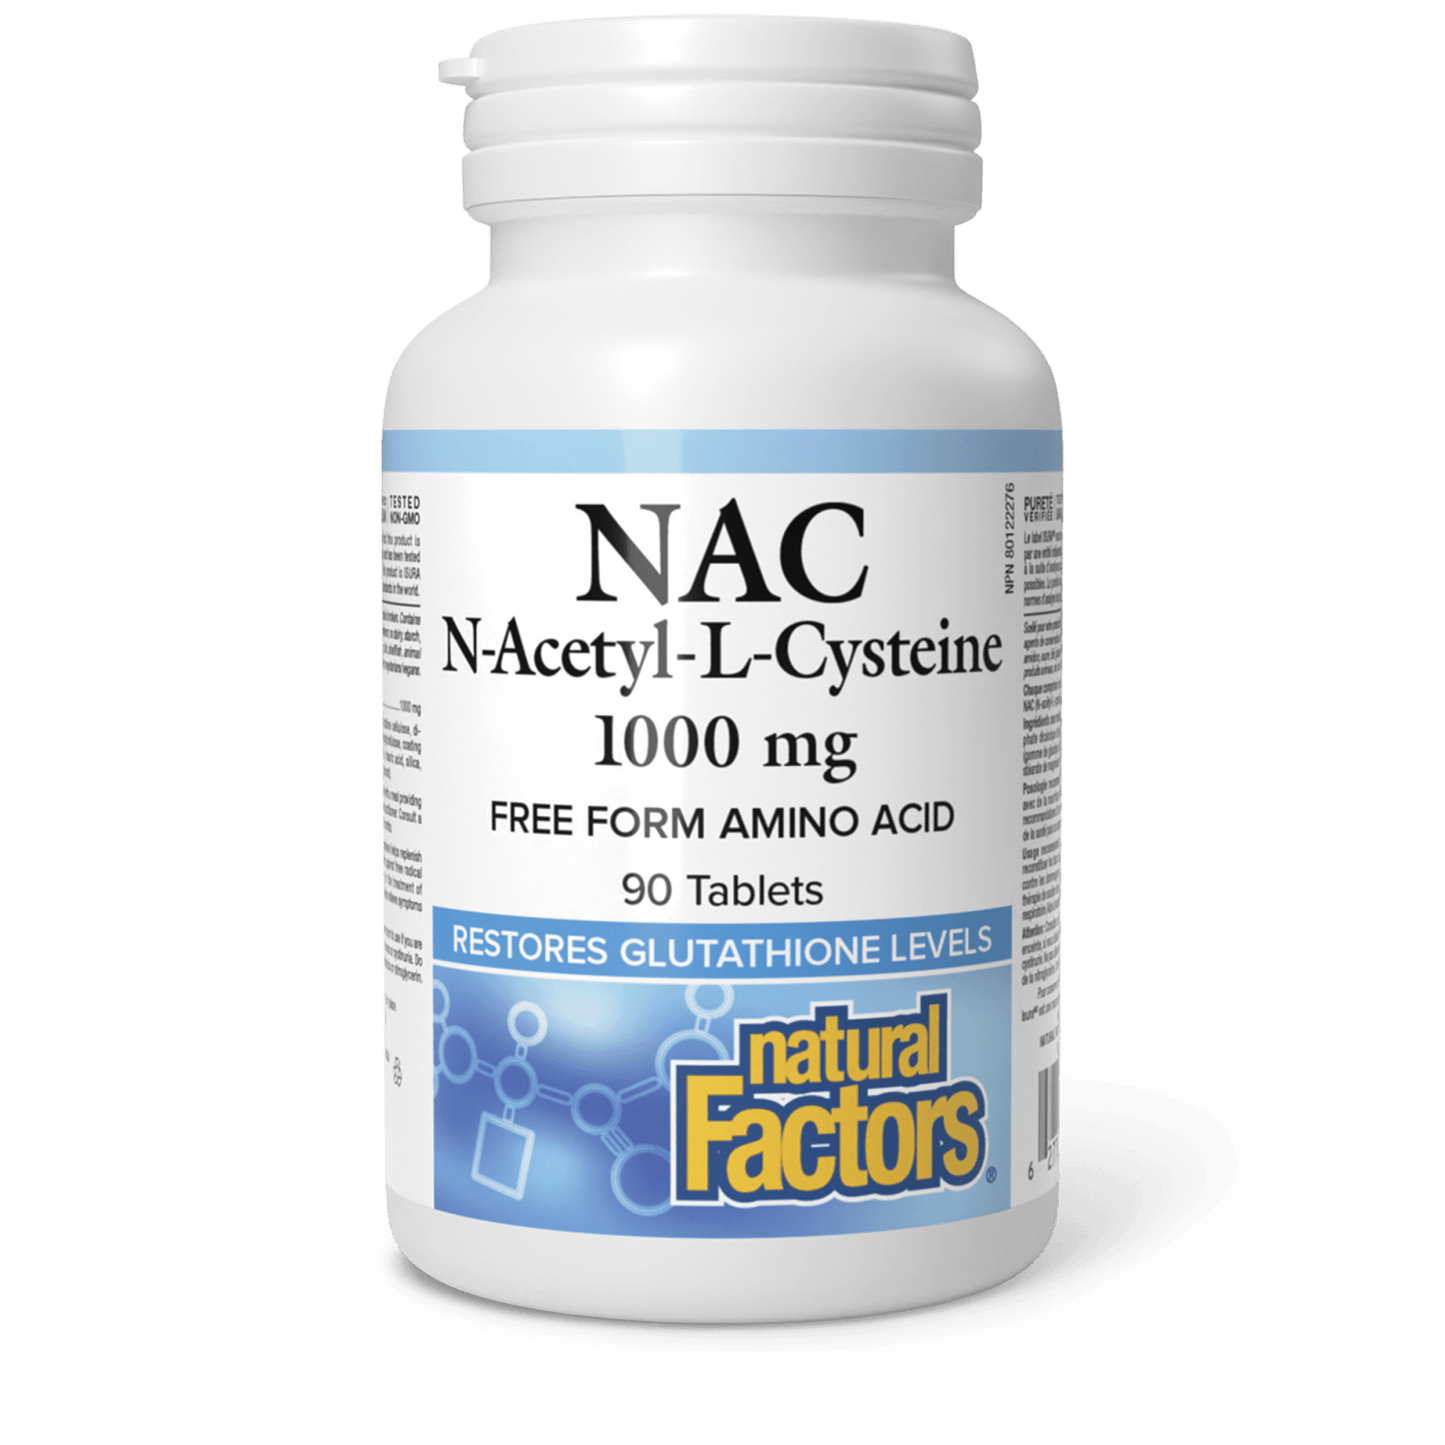 N-Acetyl-L-Cysteine 1000 mg, Natural Factors|v|image|2865